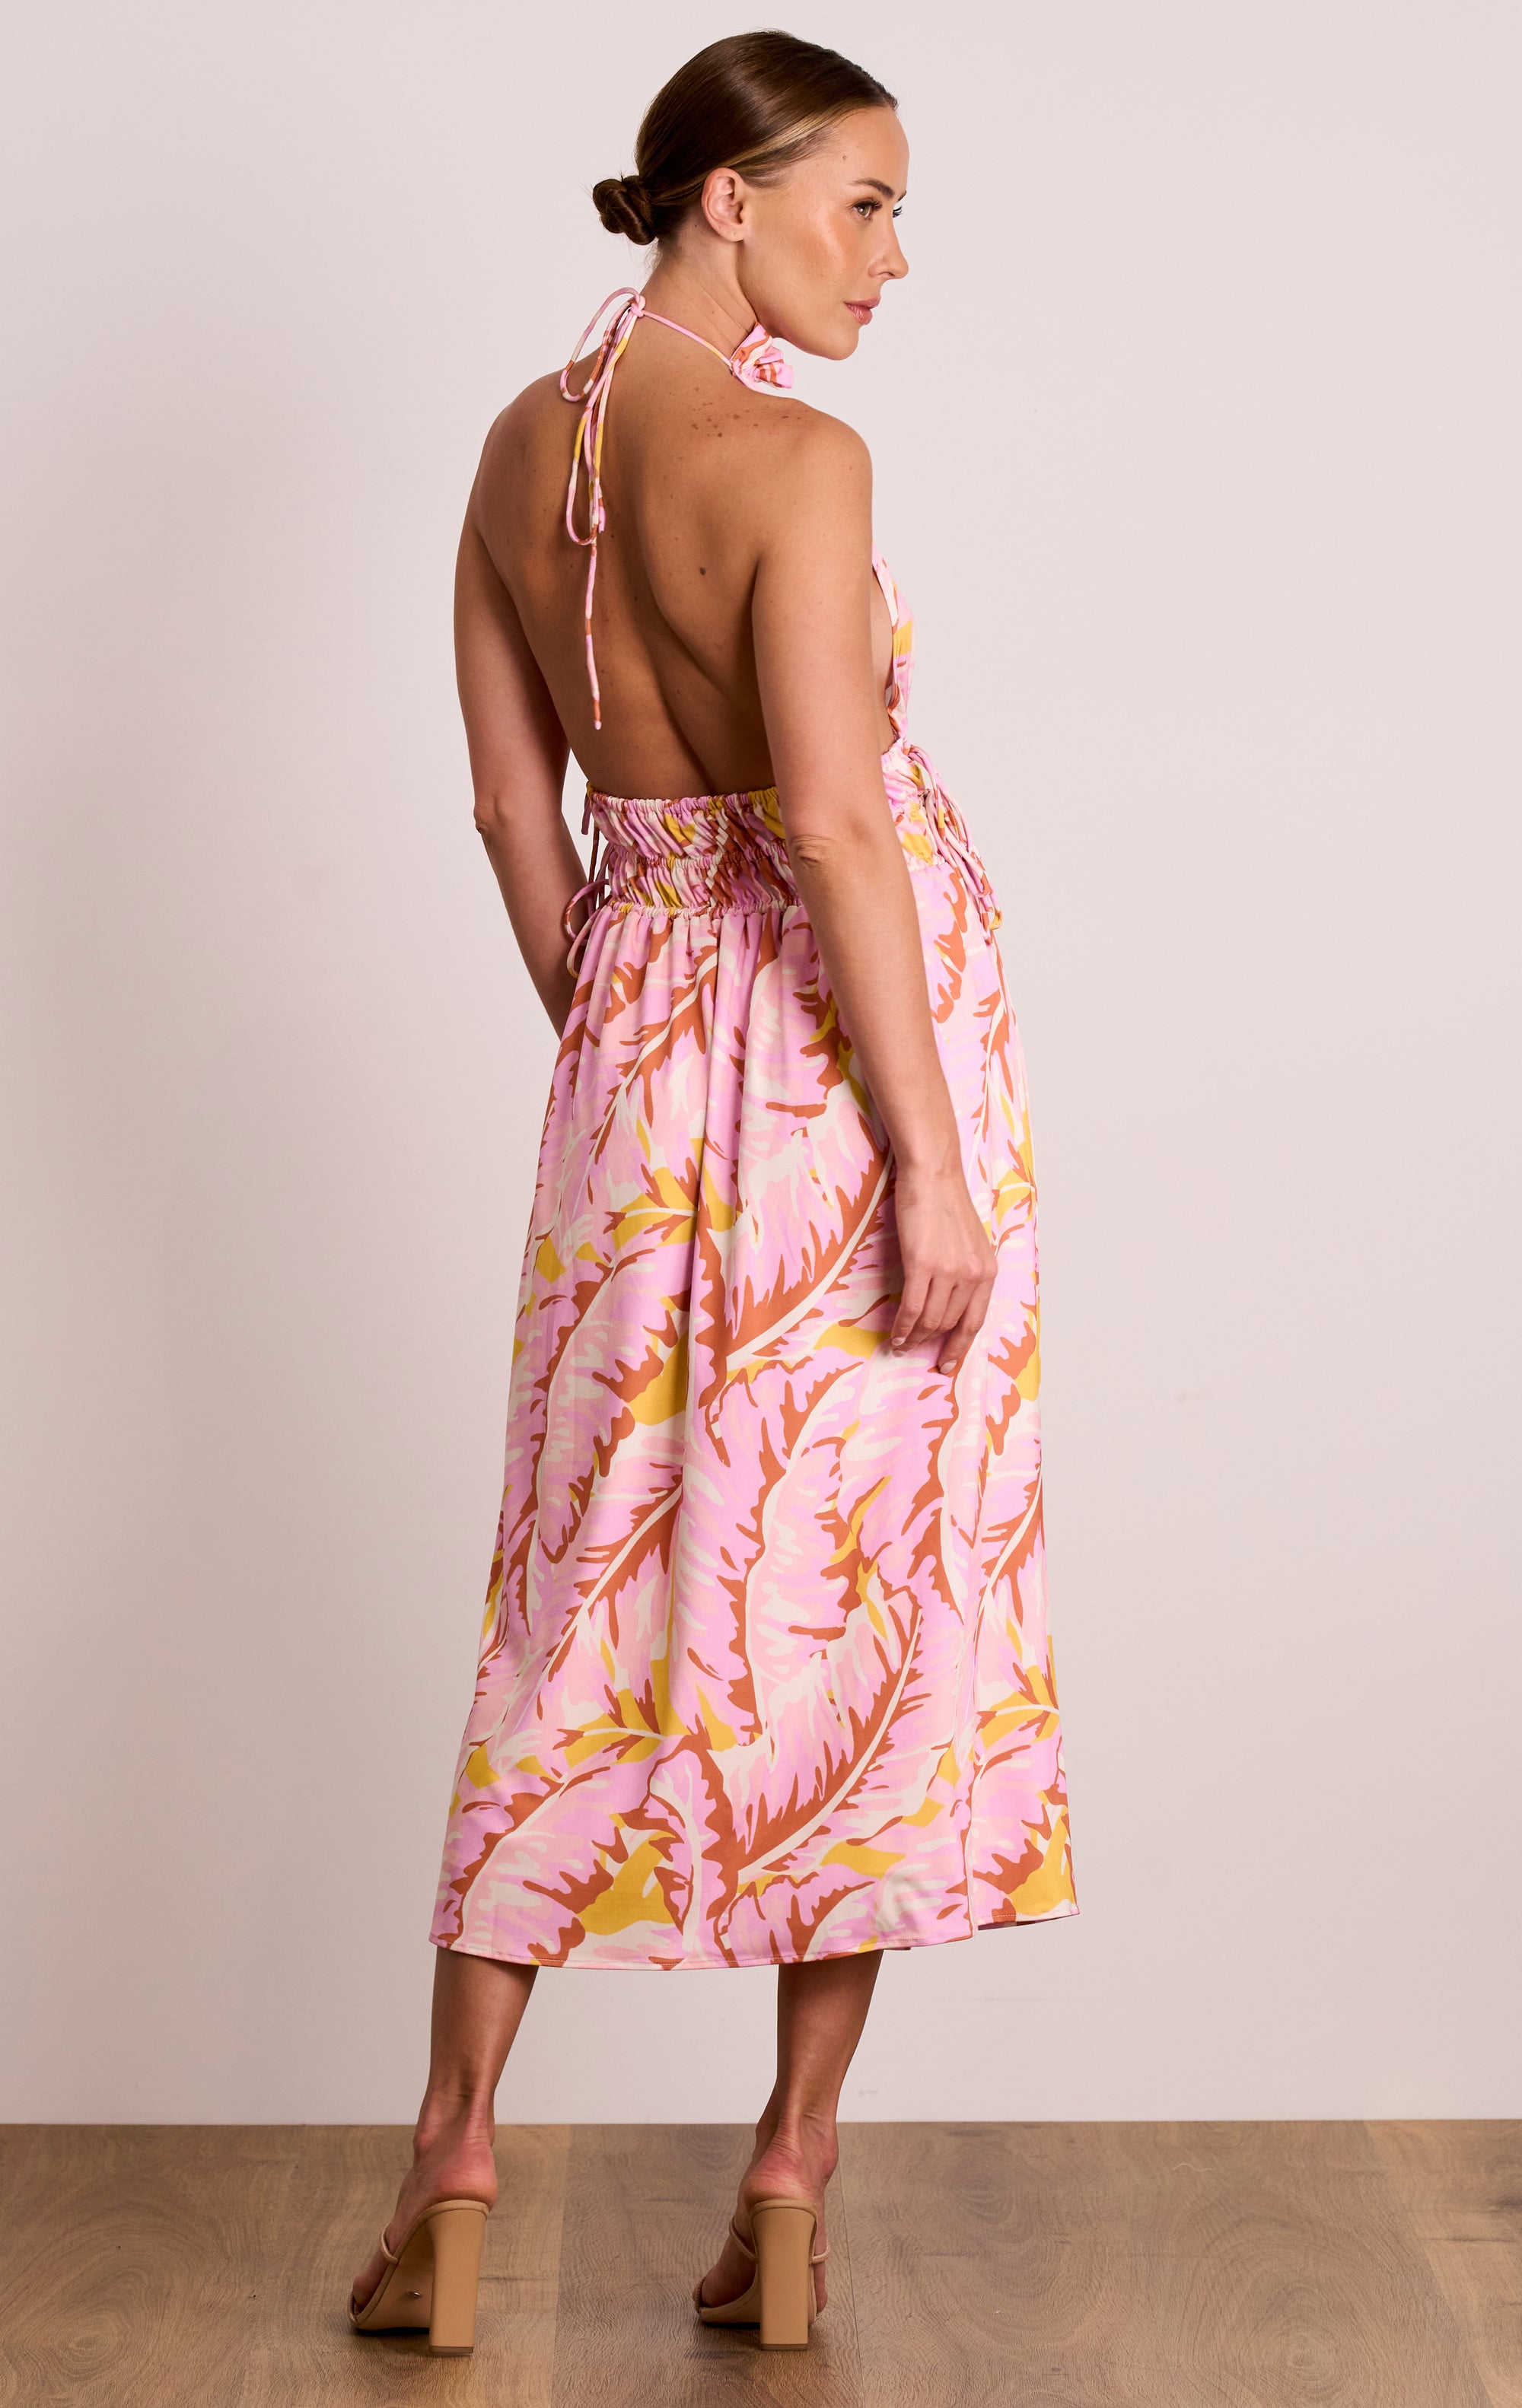 Sweet Nothings Halter Midi - TAKE 40% OFF DISCOUNT APPLIED AT CHECKOUT